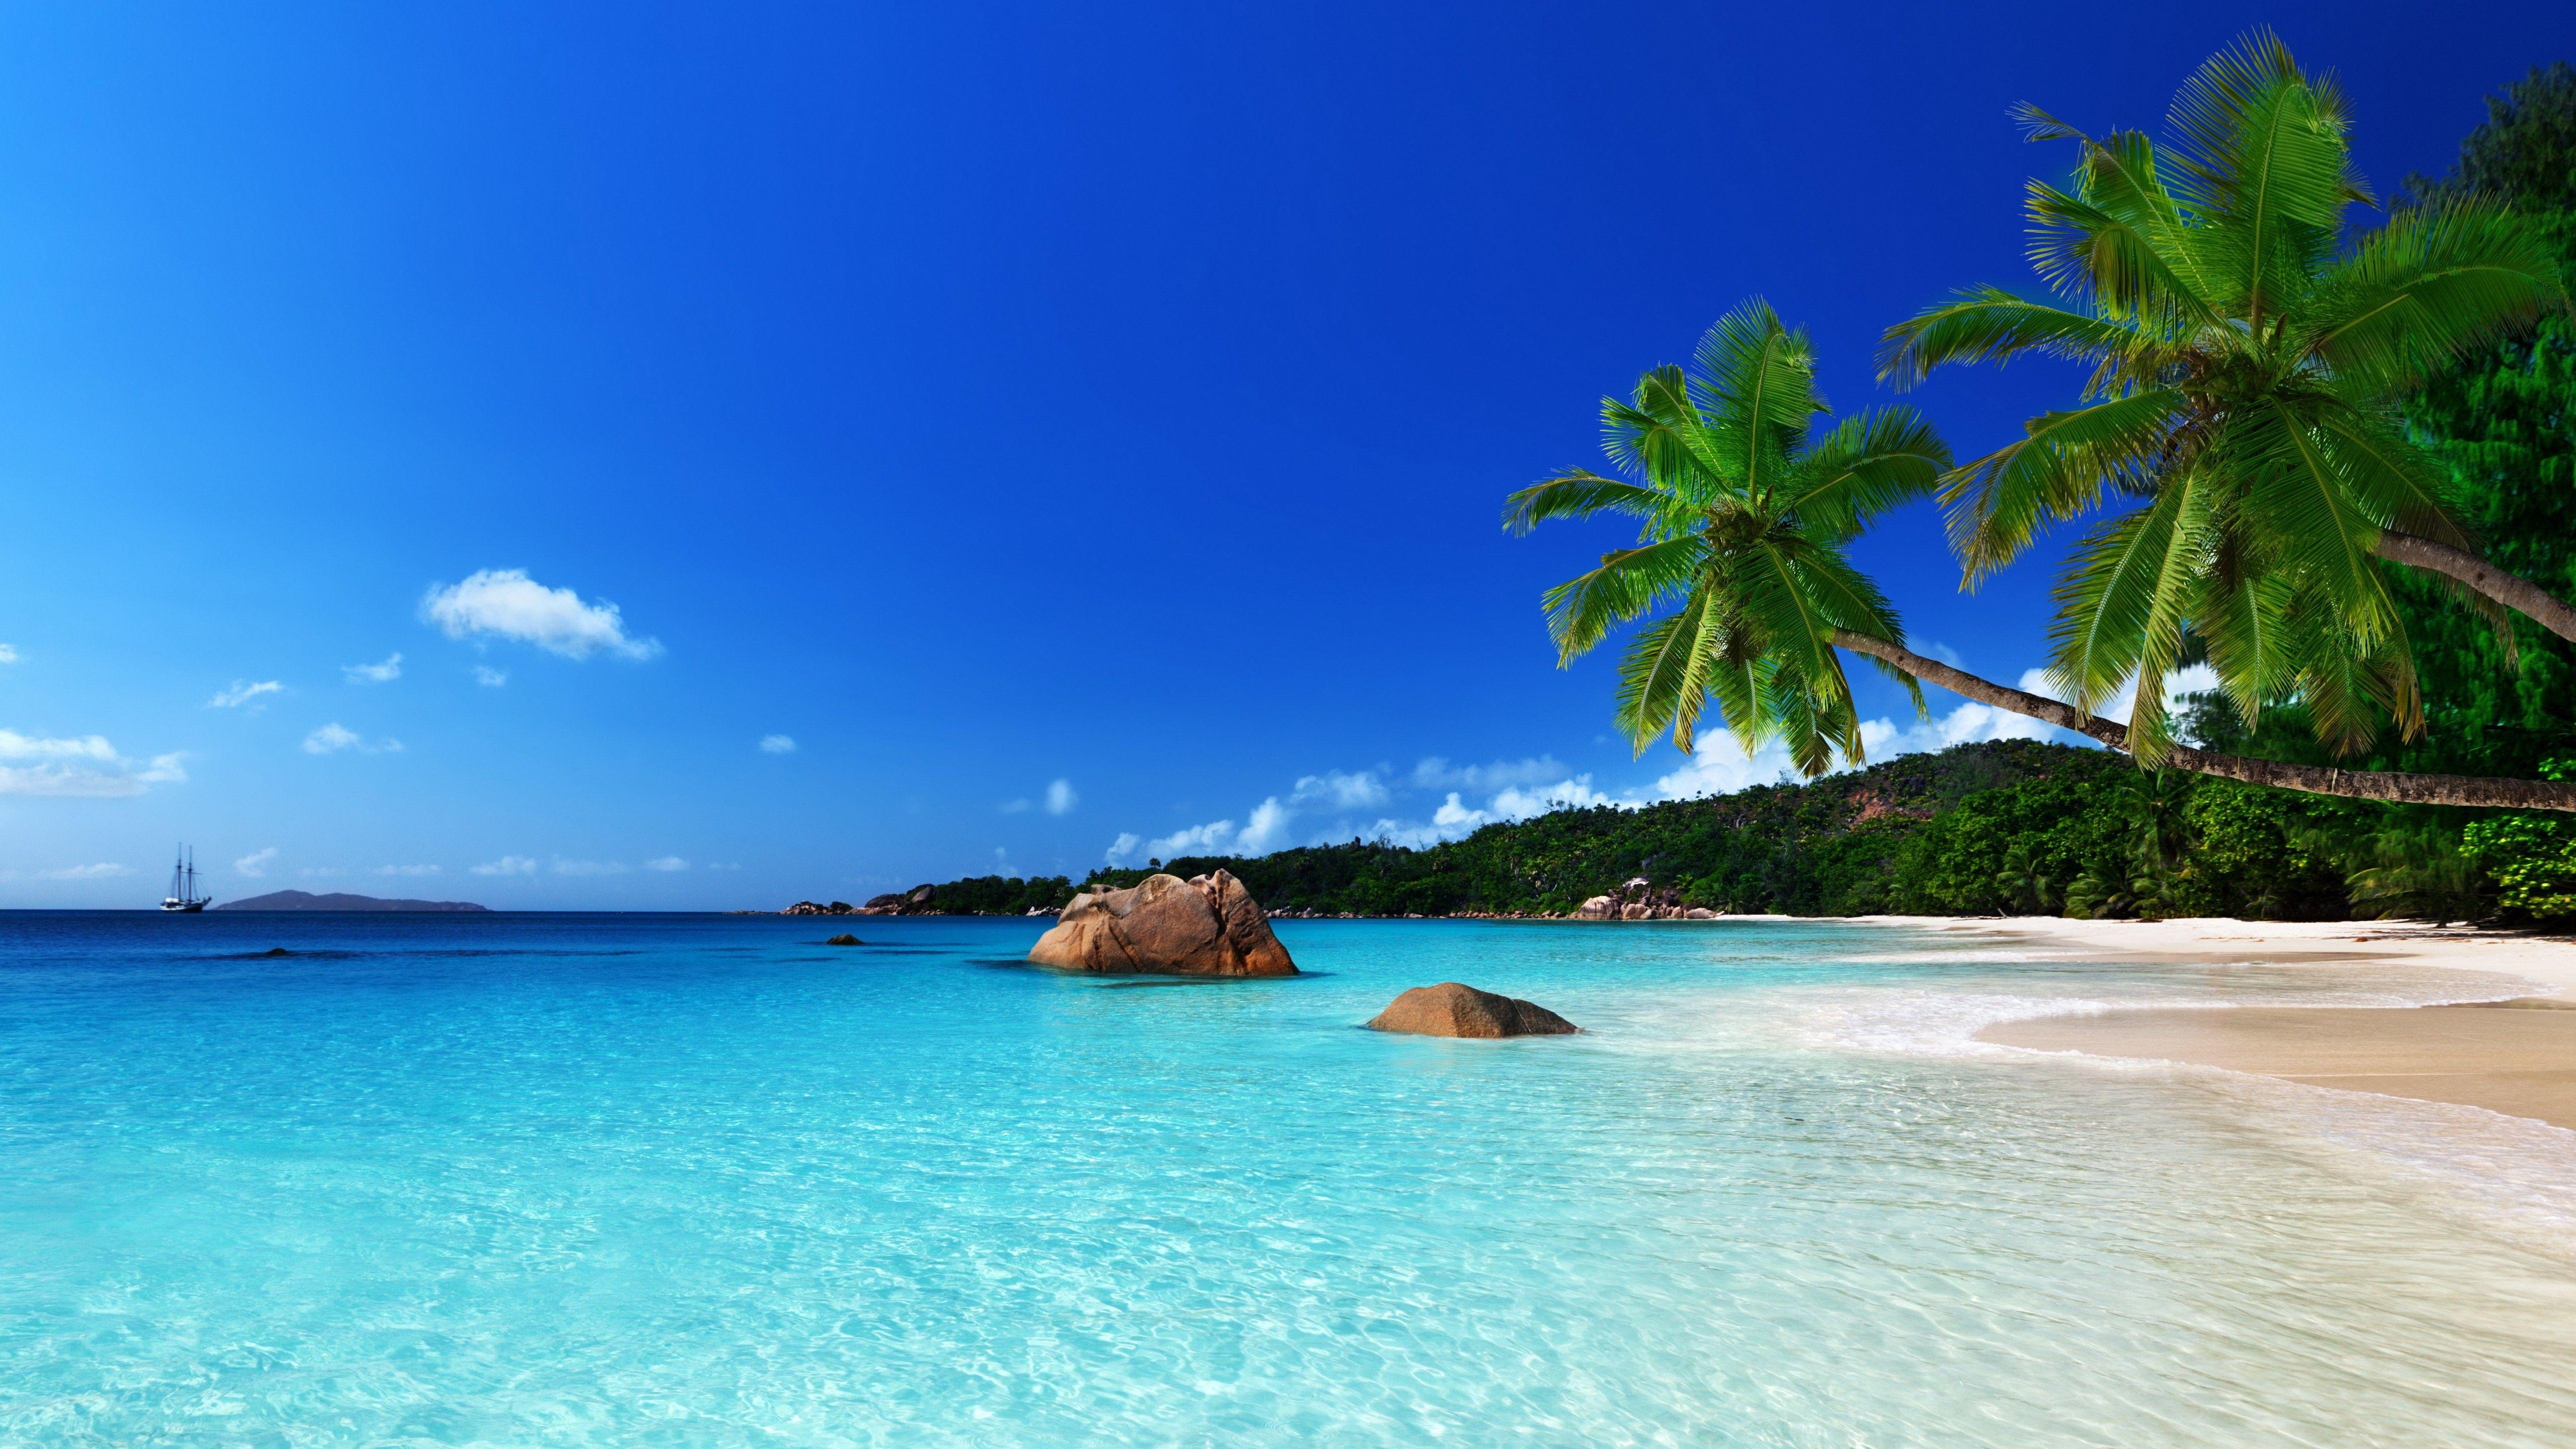 Tropical Beach Landscape Wallpapers Top Free Tropical Beach Landscape Backgrounds Wallpaperaccess